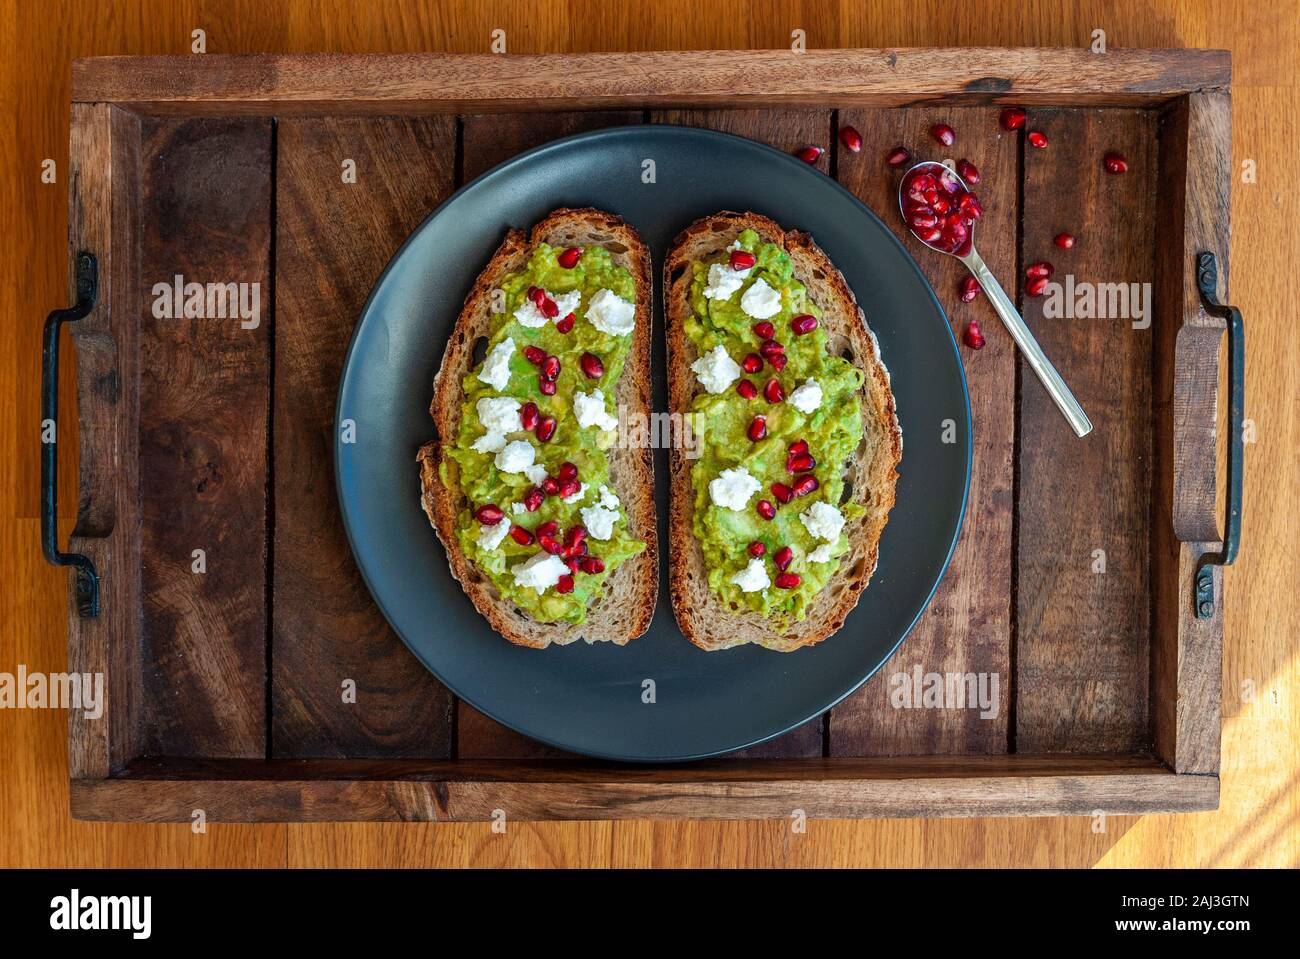 Avocado sandwich on sliced bread toast made with pomegranate and feta cheese Stock Photo